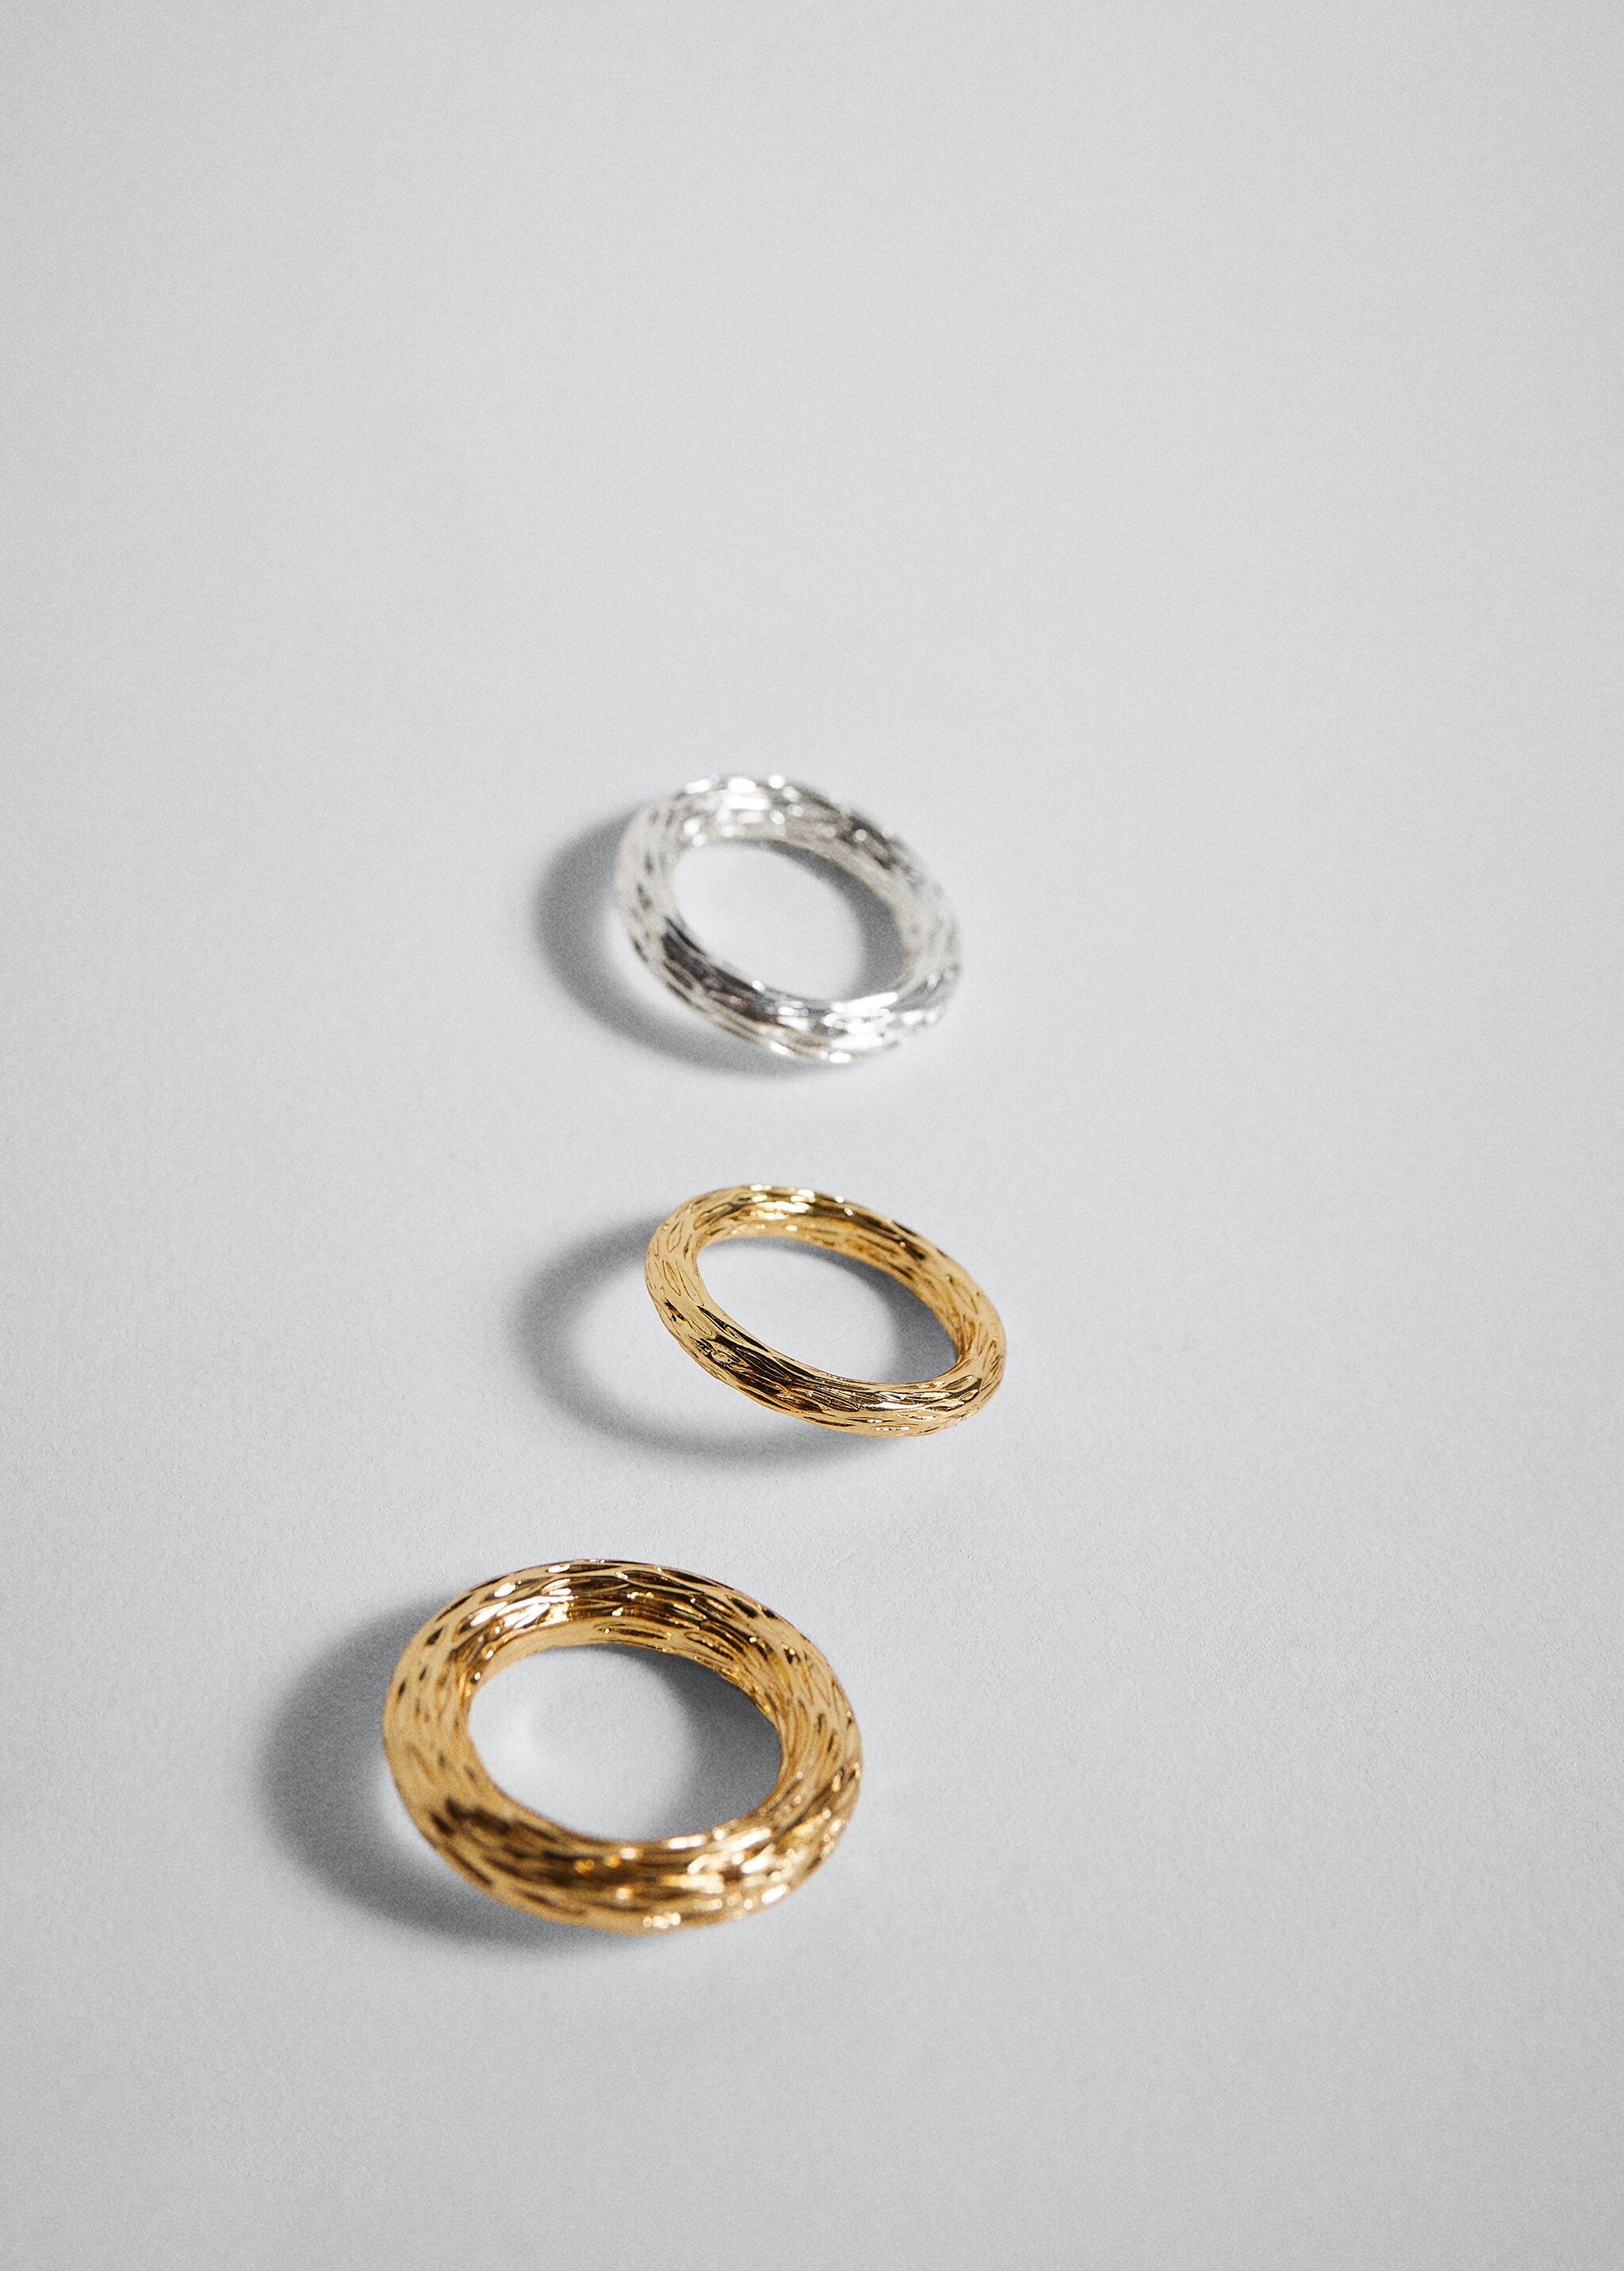 Pack of 3 combined rings - Medium plane